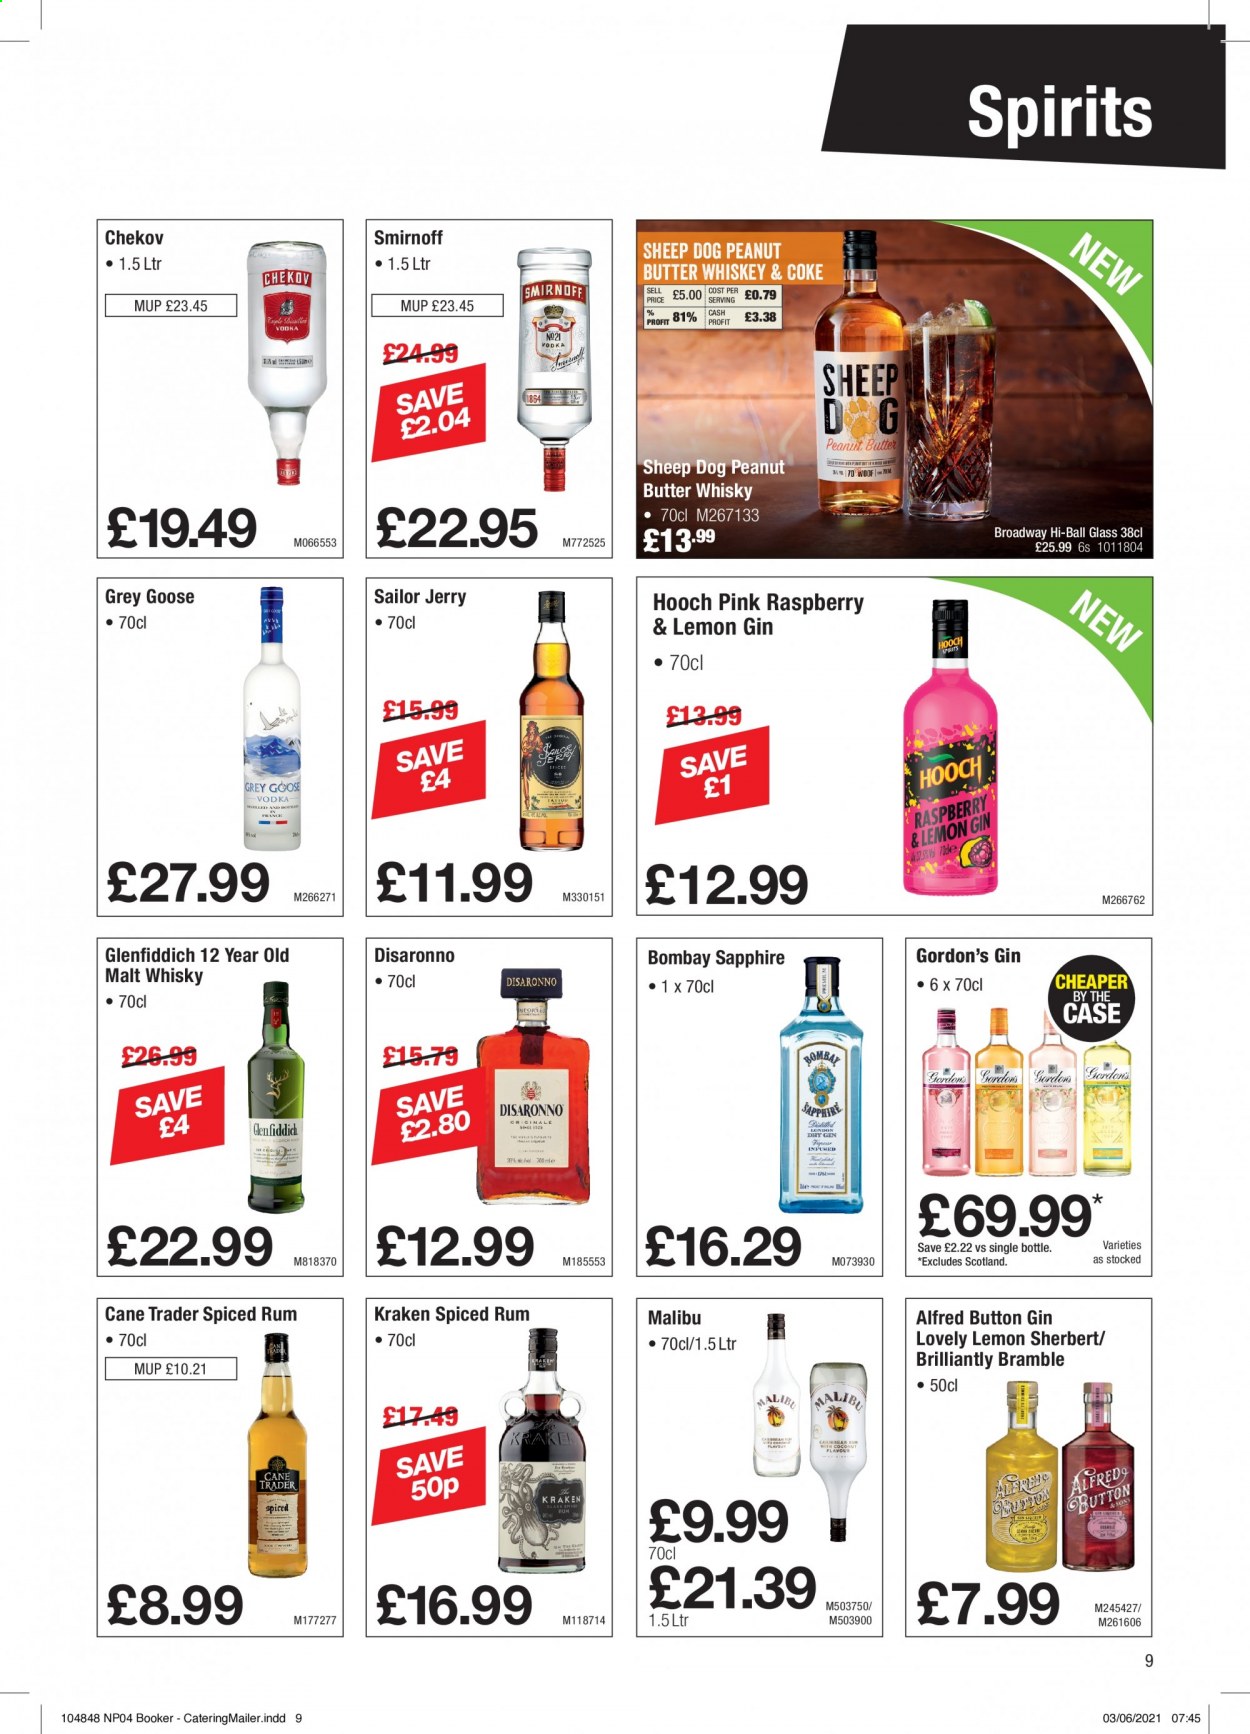 thumbnail - Makro offer  - 08/06/2021 - 06/07/2021 - Sales products - peanut butter, gin, Smirnoff, spiced rum, whiskey, Gordon's, rum, Malibu, Glenfiddich, whisky. Page 9.